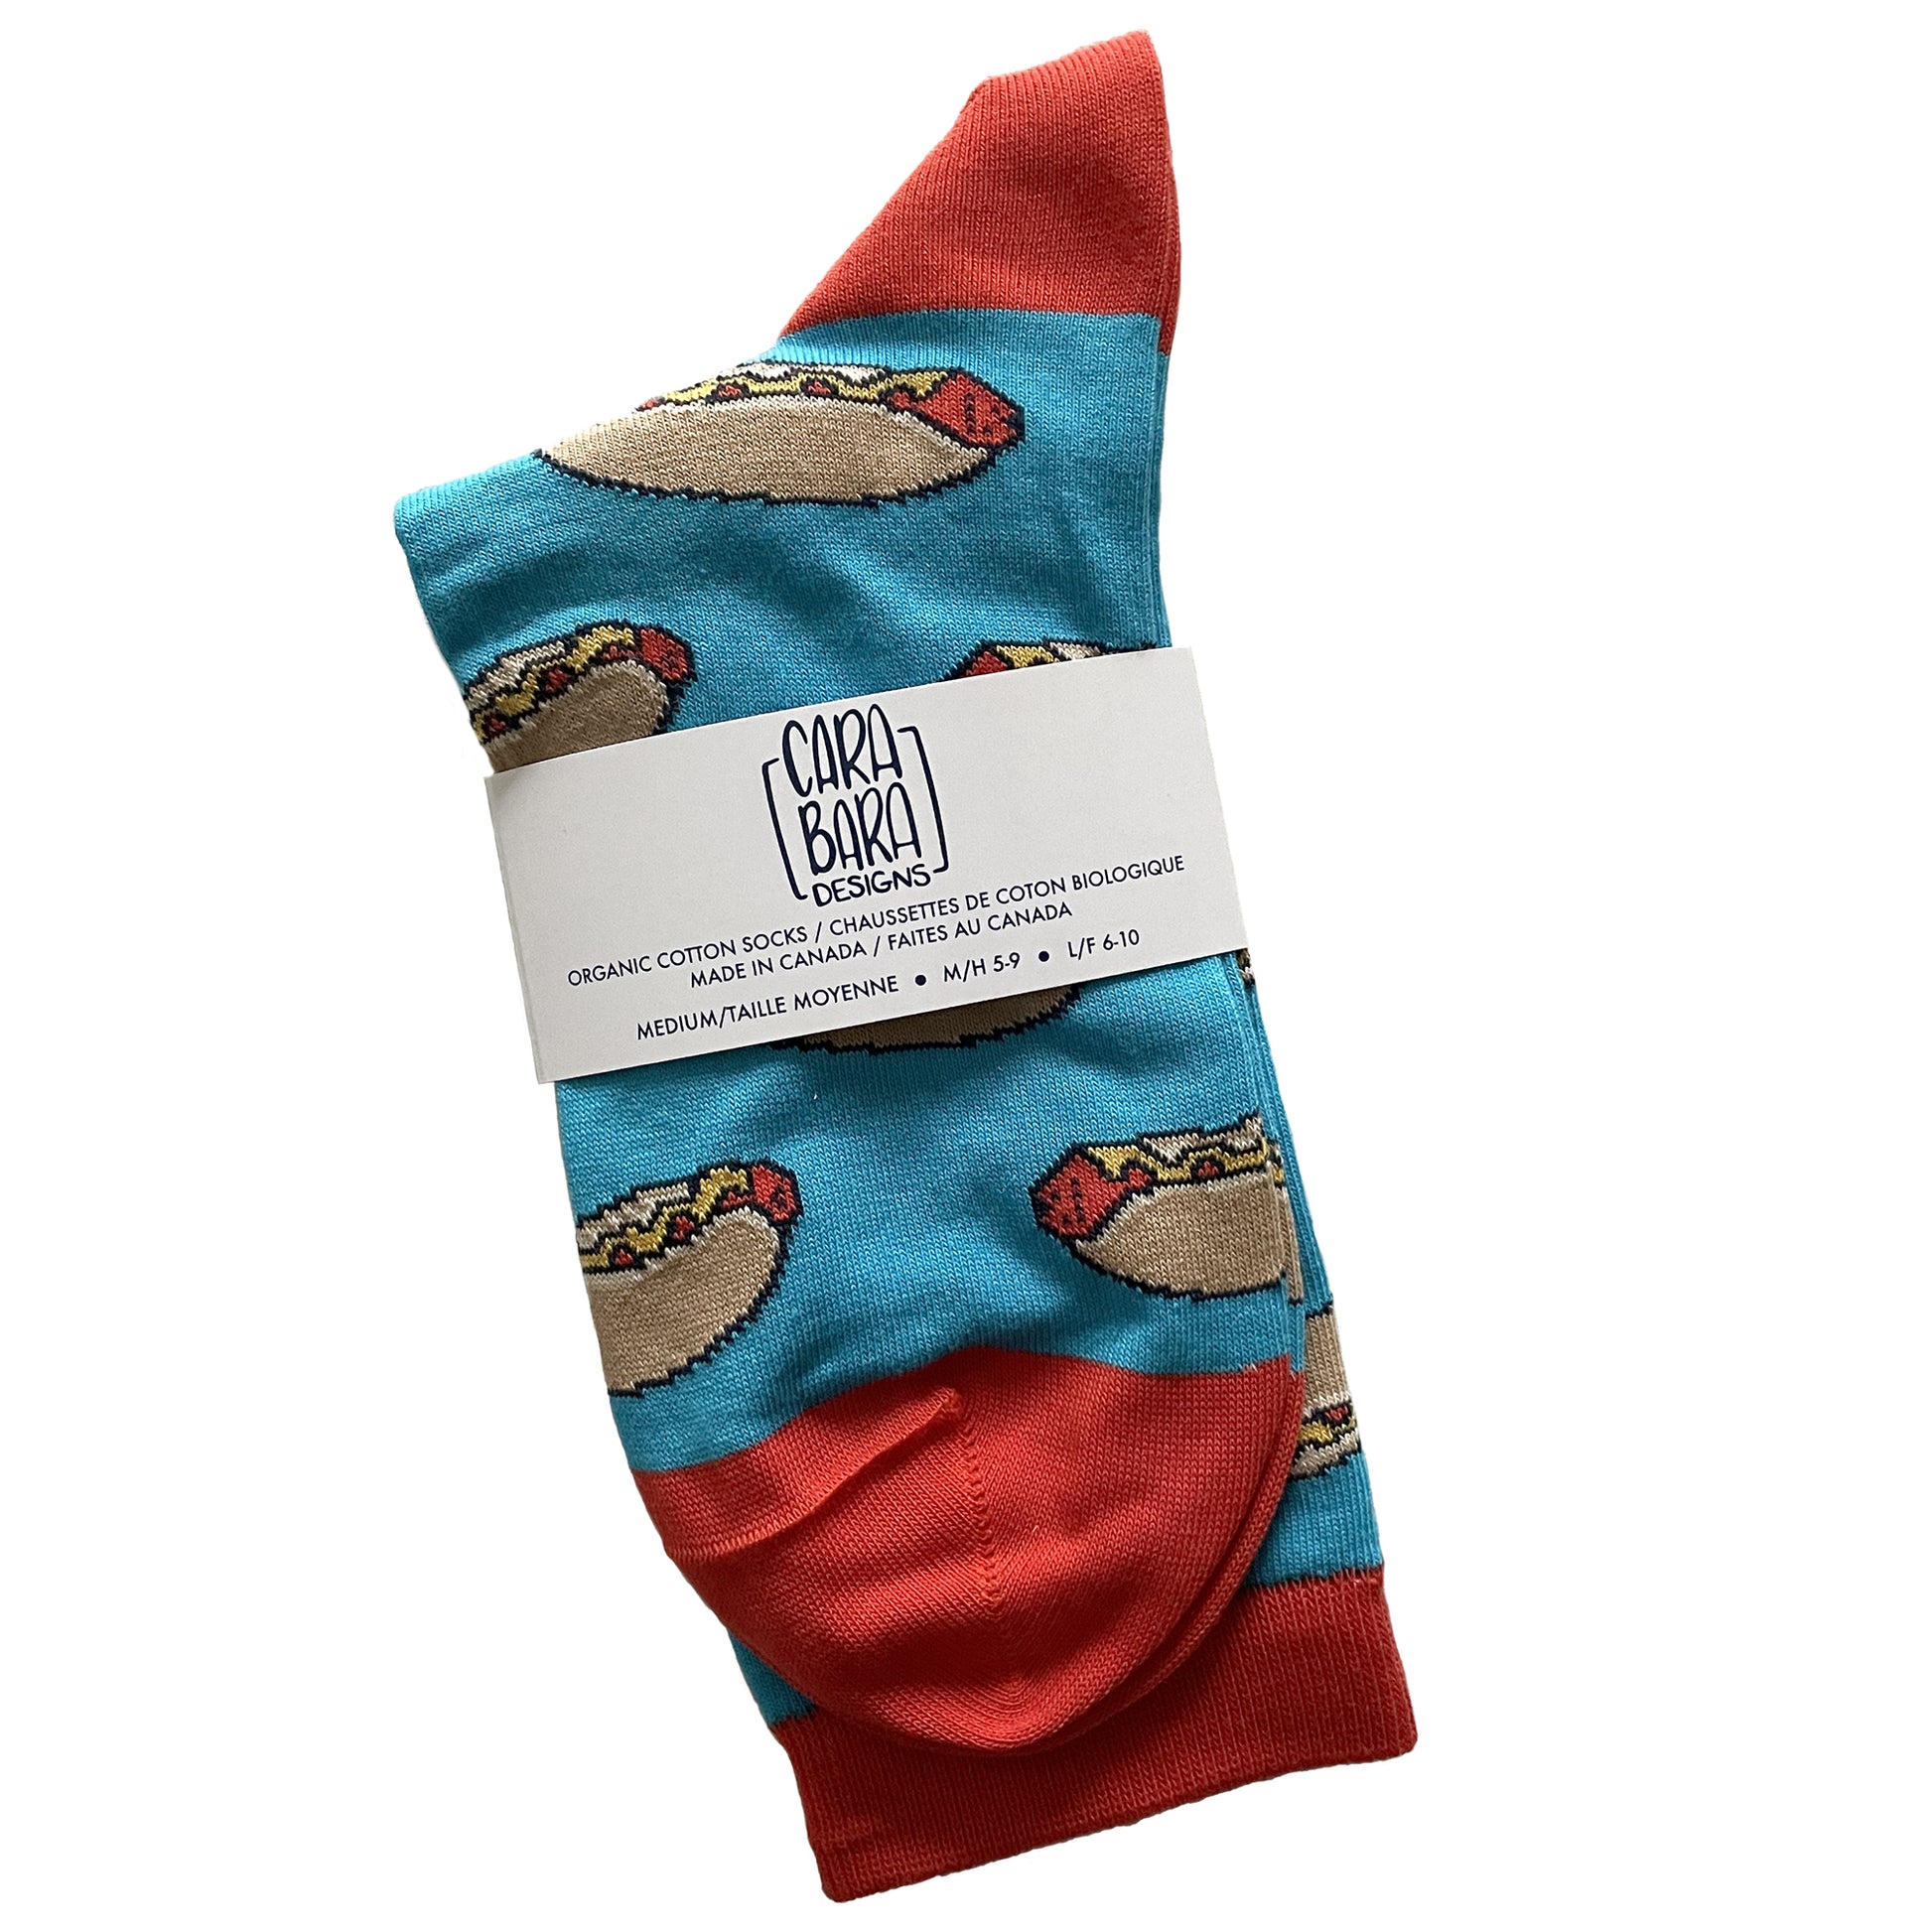 A pair of blue socks is patterned with hot dogs and has red accents. It is folded and labelled with a belly band with the Carabara Designs logo and the words organic cotton socks made in Canada, size medium, in English and French.